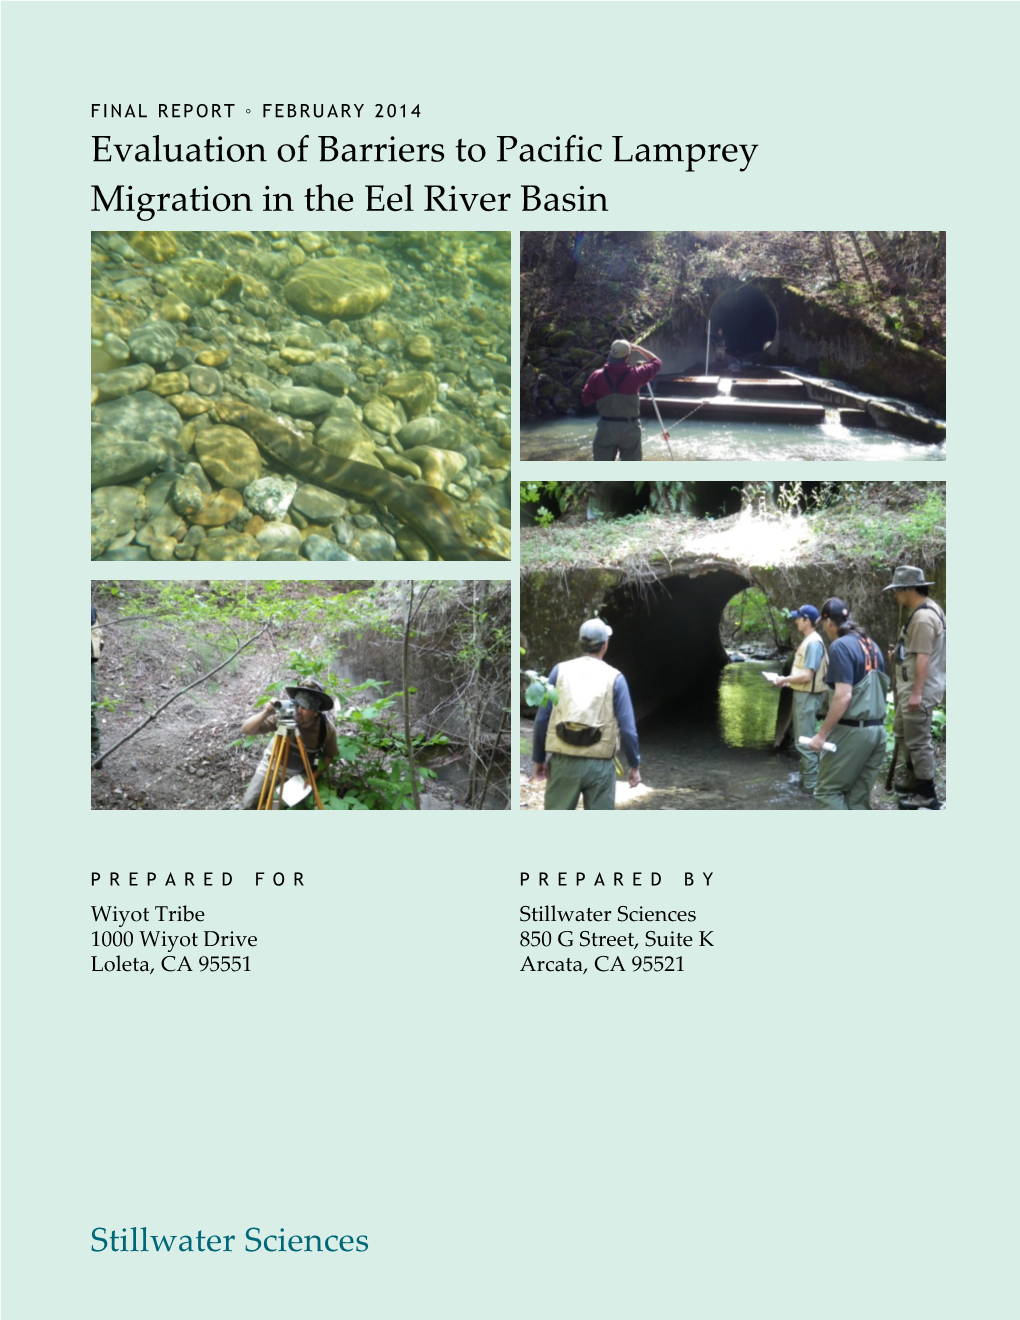 Evaluation of Barriers to Pacific Lamprey Migration in the Eel River Basin